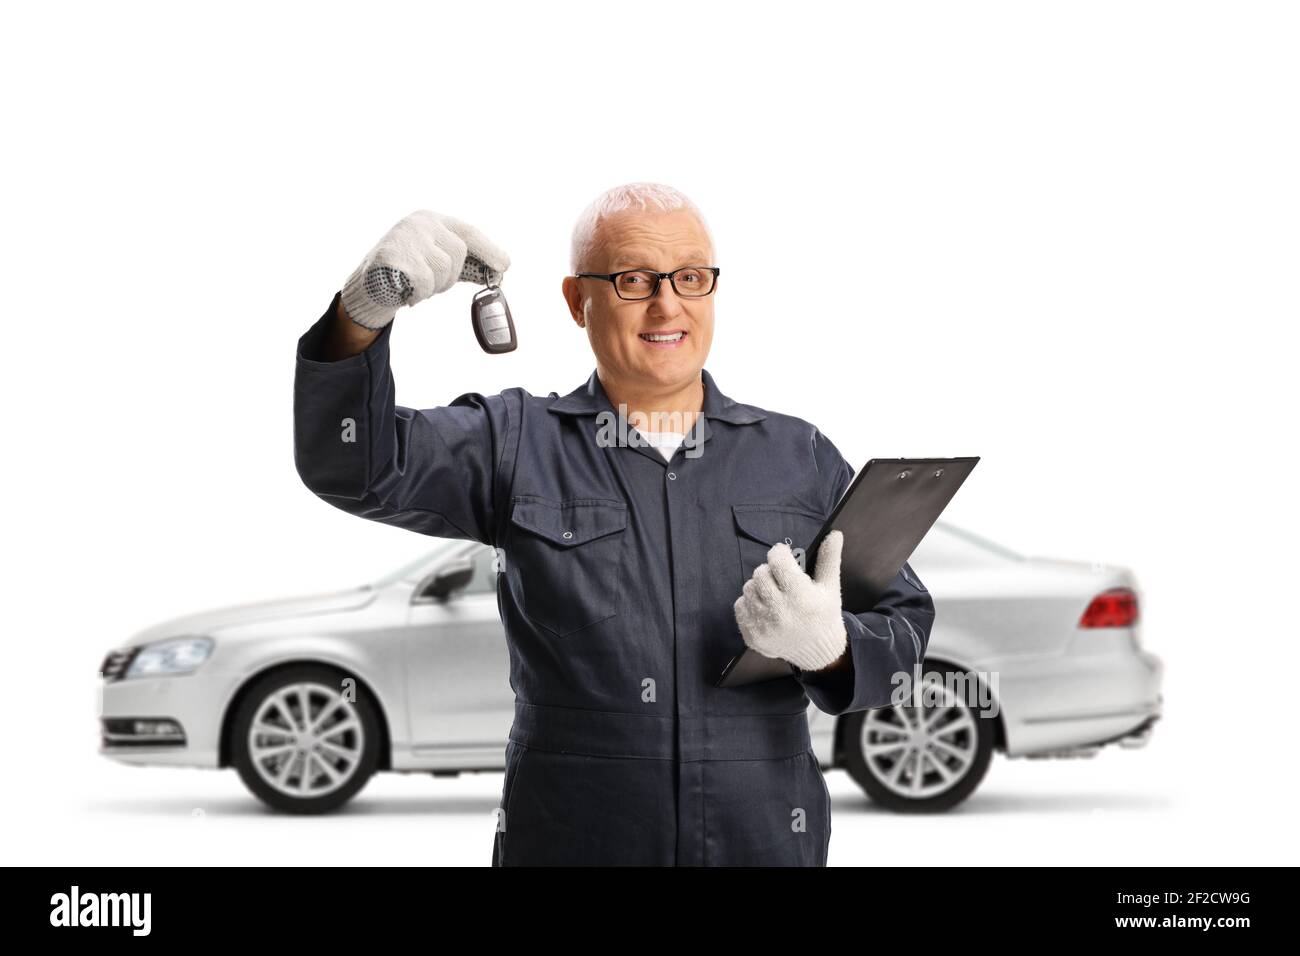 Auto mechanic holding a key from a silver car isolated on white background Stock Photo